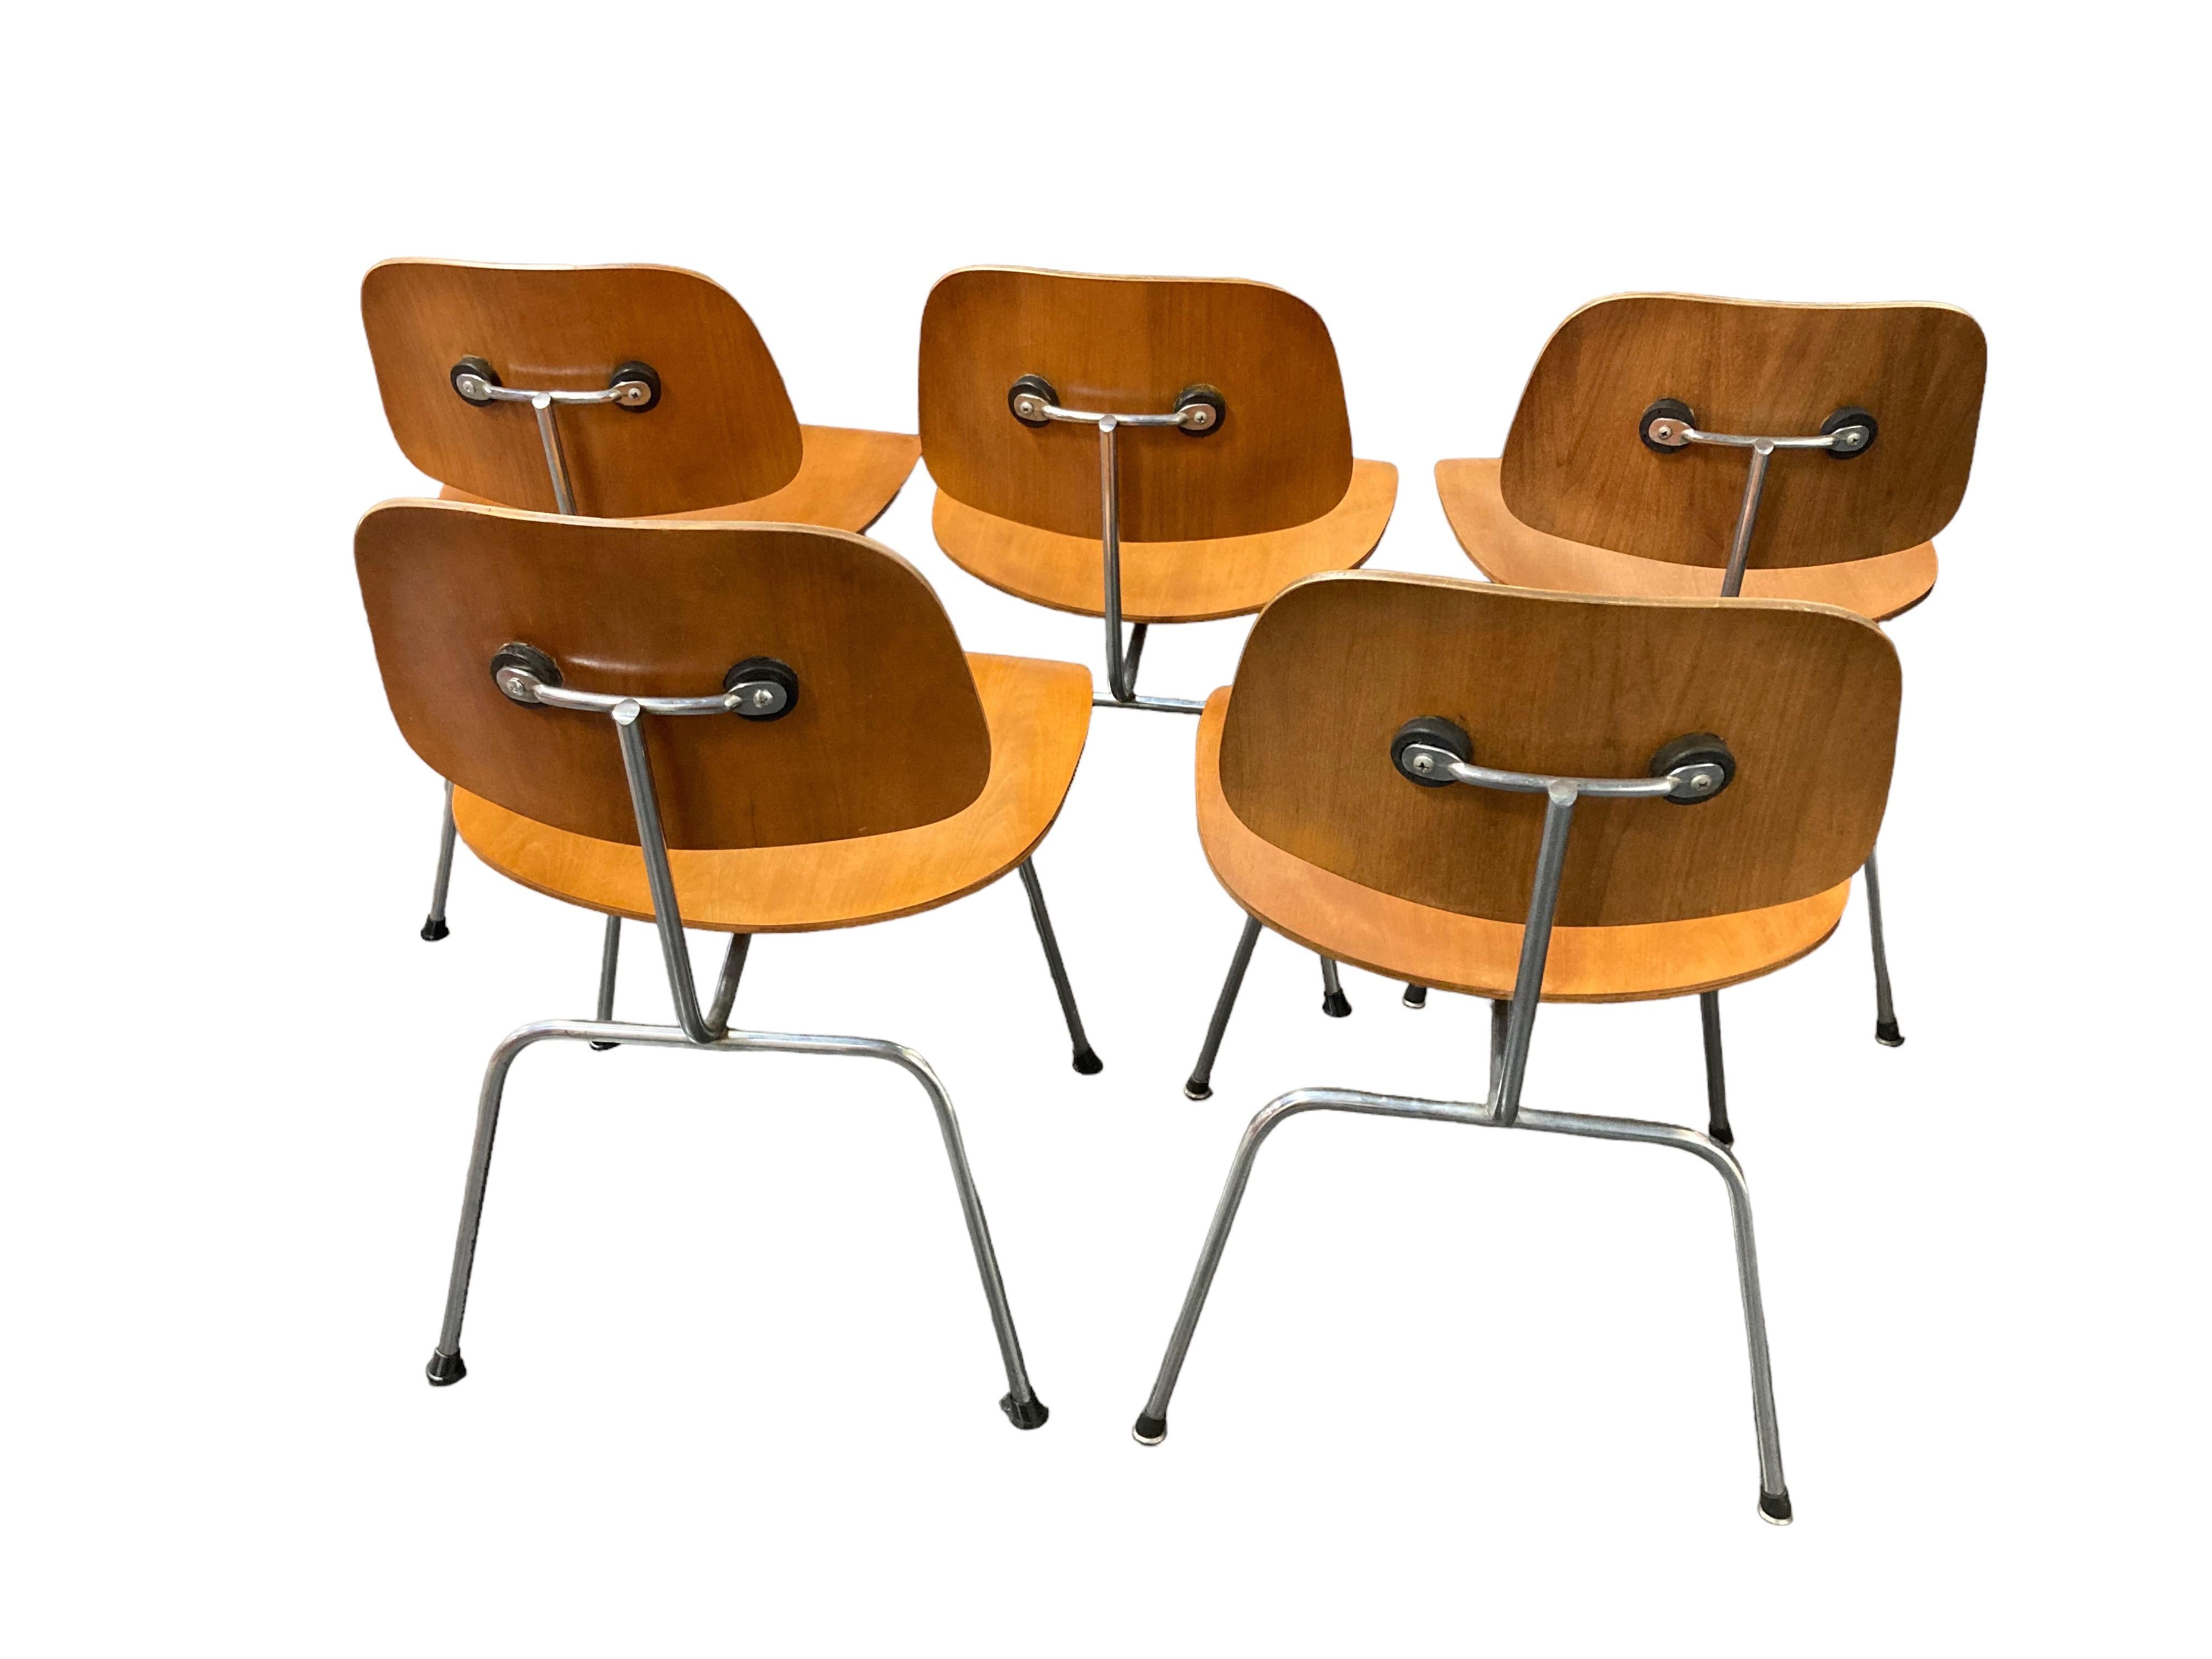 Hand-Crafted Herman Miller Charles & Ray Eames LCM Chair Set of 5